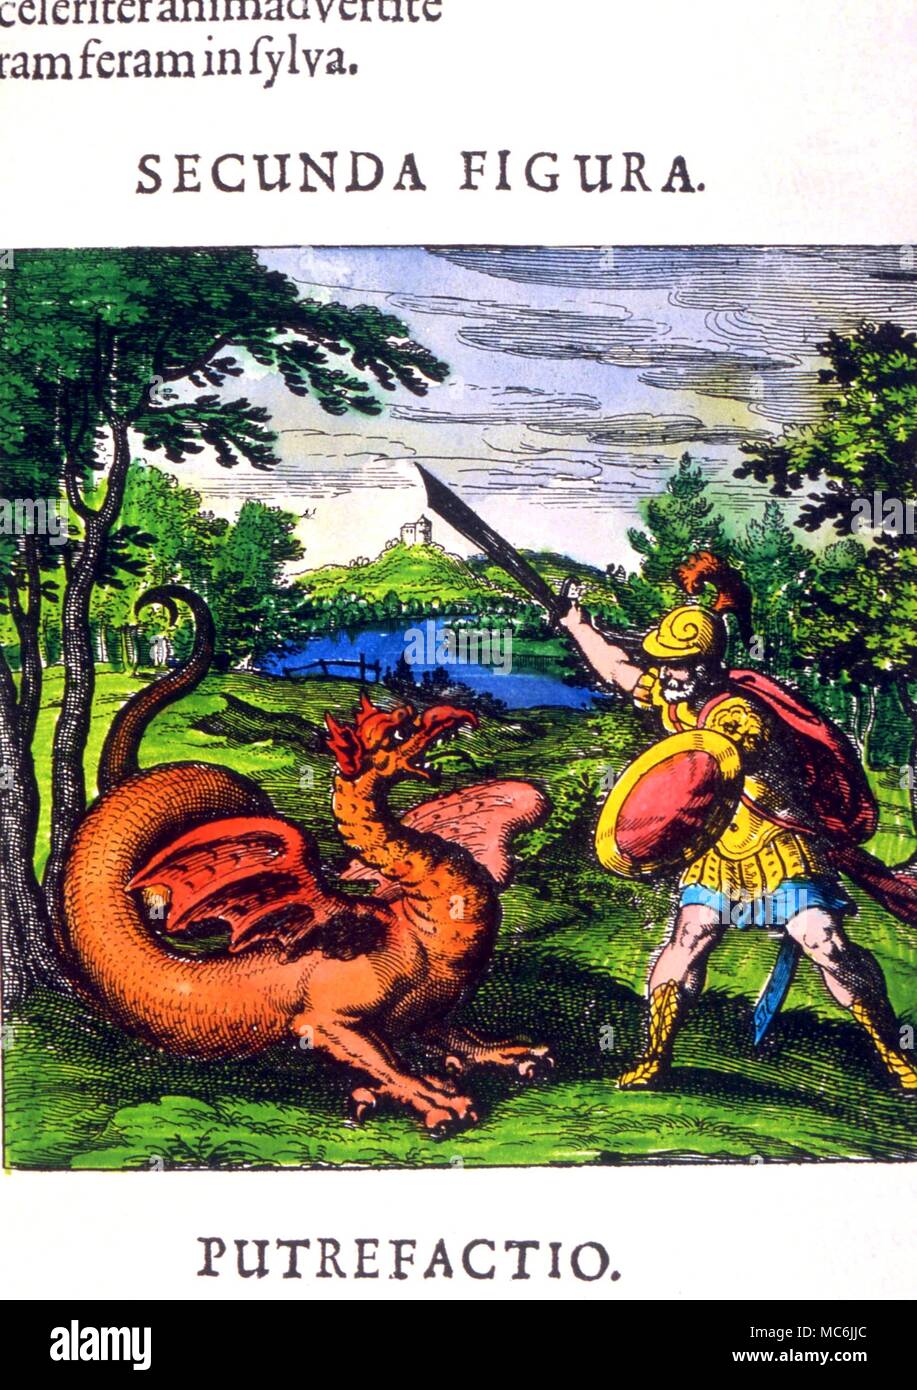 ALCHEMY - PUTREFACTION. Putrefaction symbolised by fight beteeen knight and dragon, from Lambsprinck's 'De Lapide Philosophico', 1677 edition Stock Photo